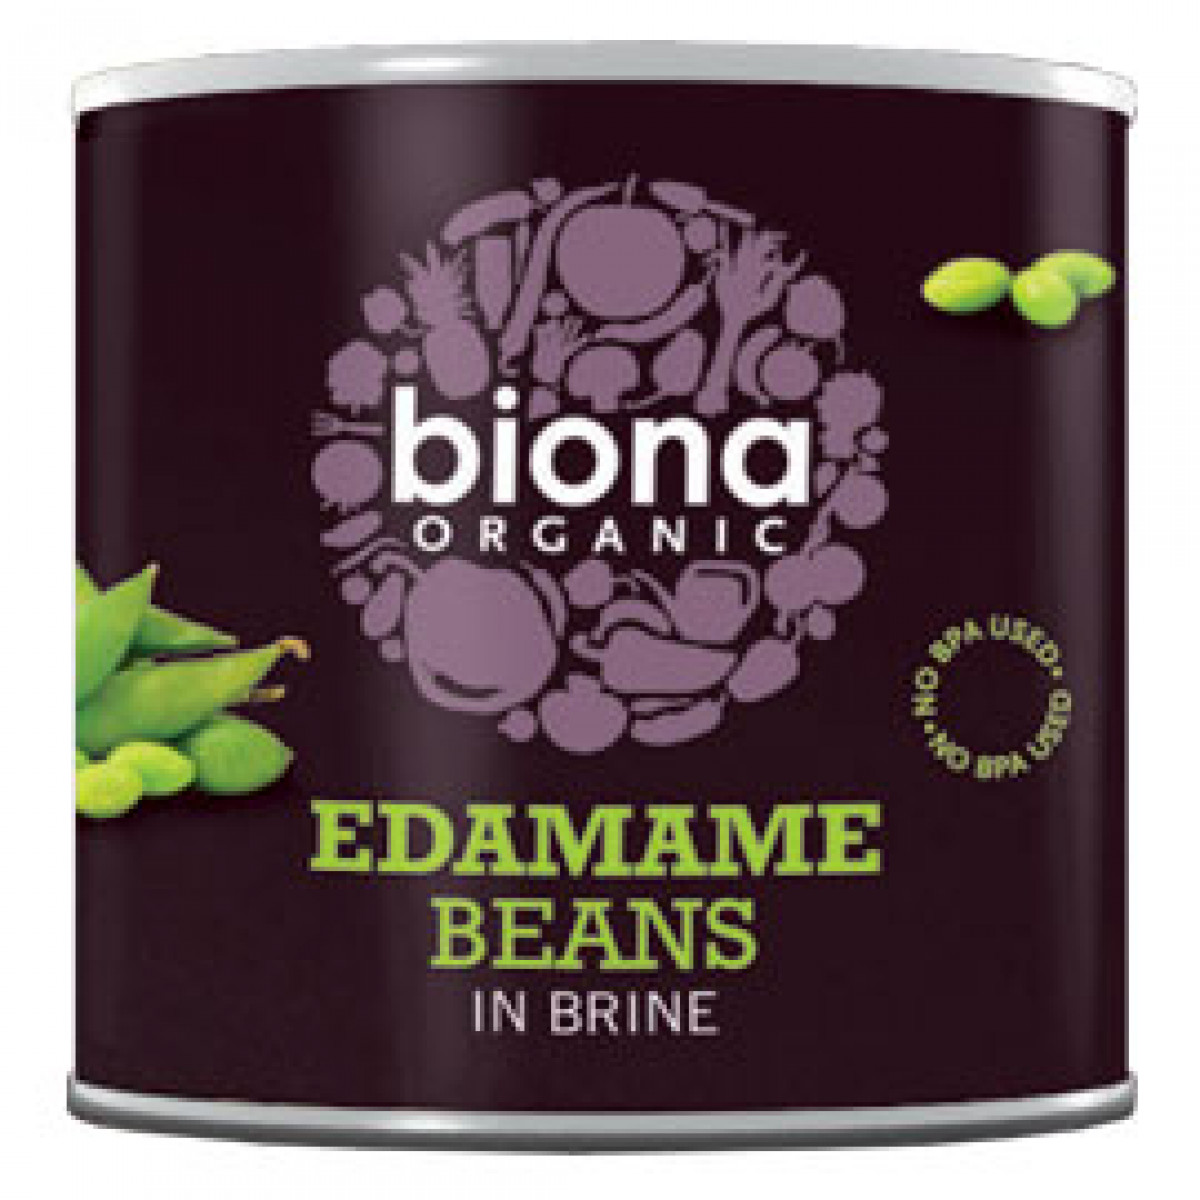 Product picture for Edamame Beans - tinned